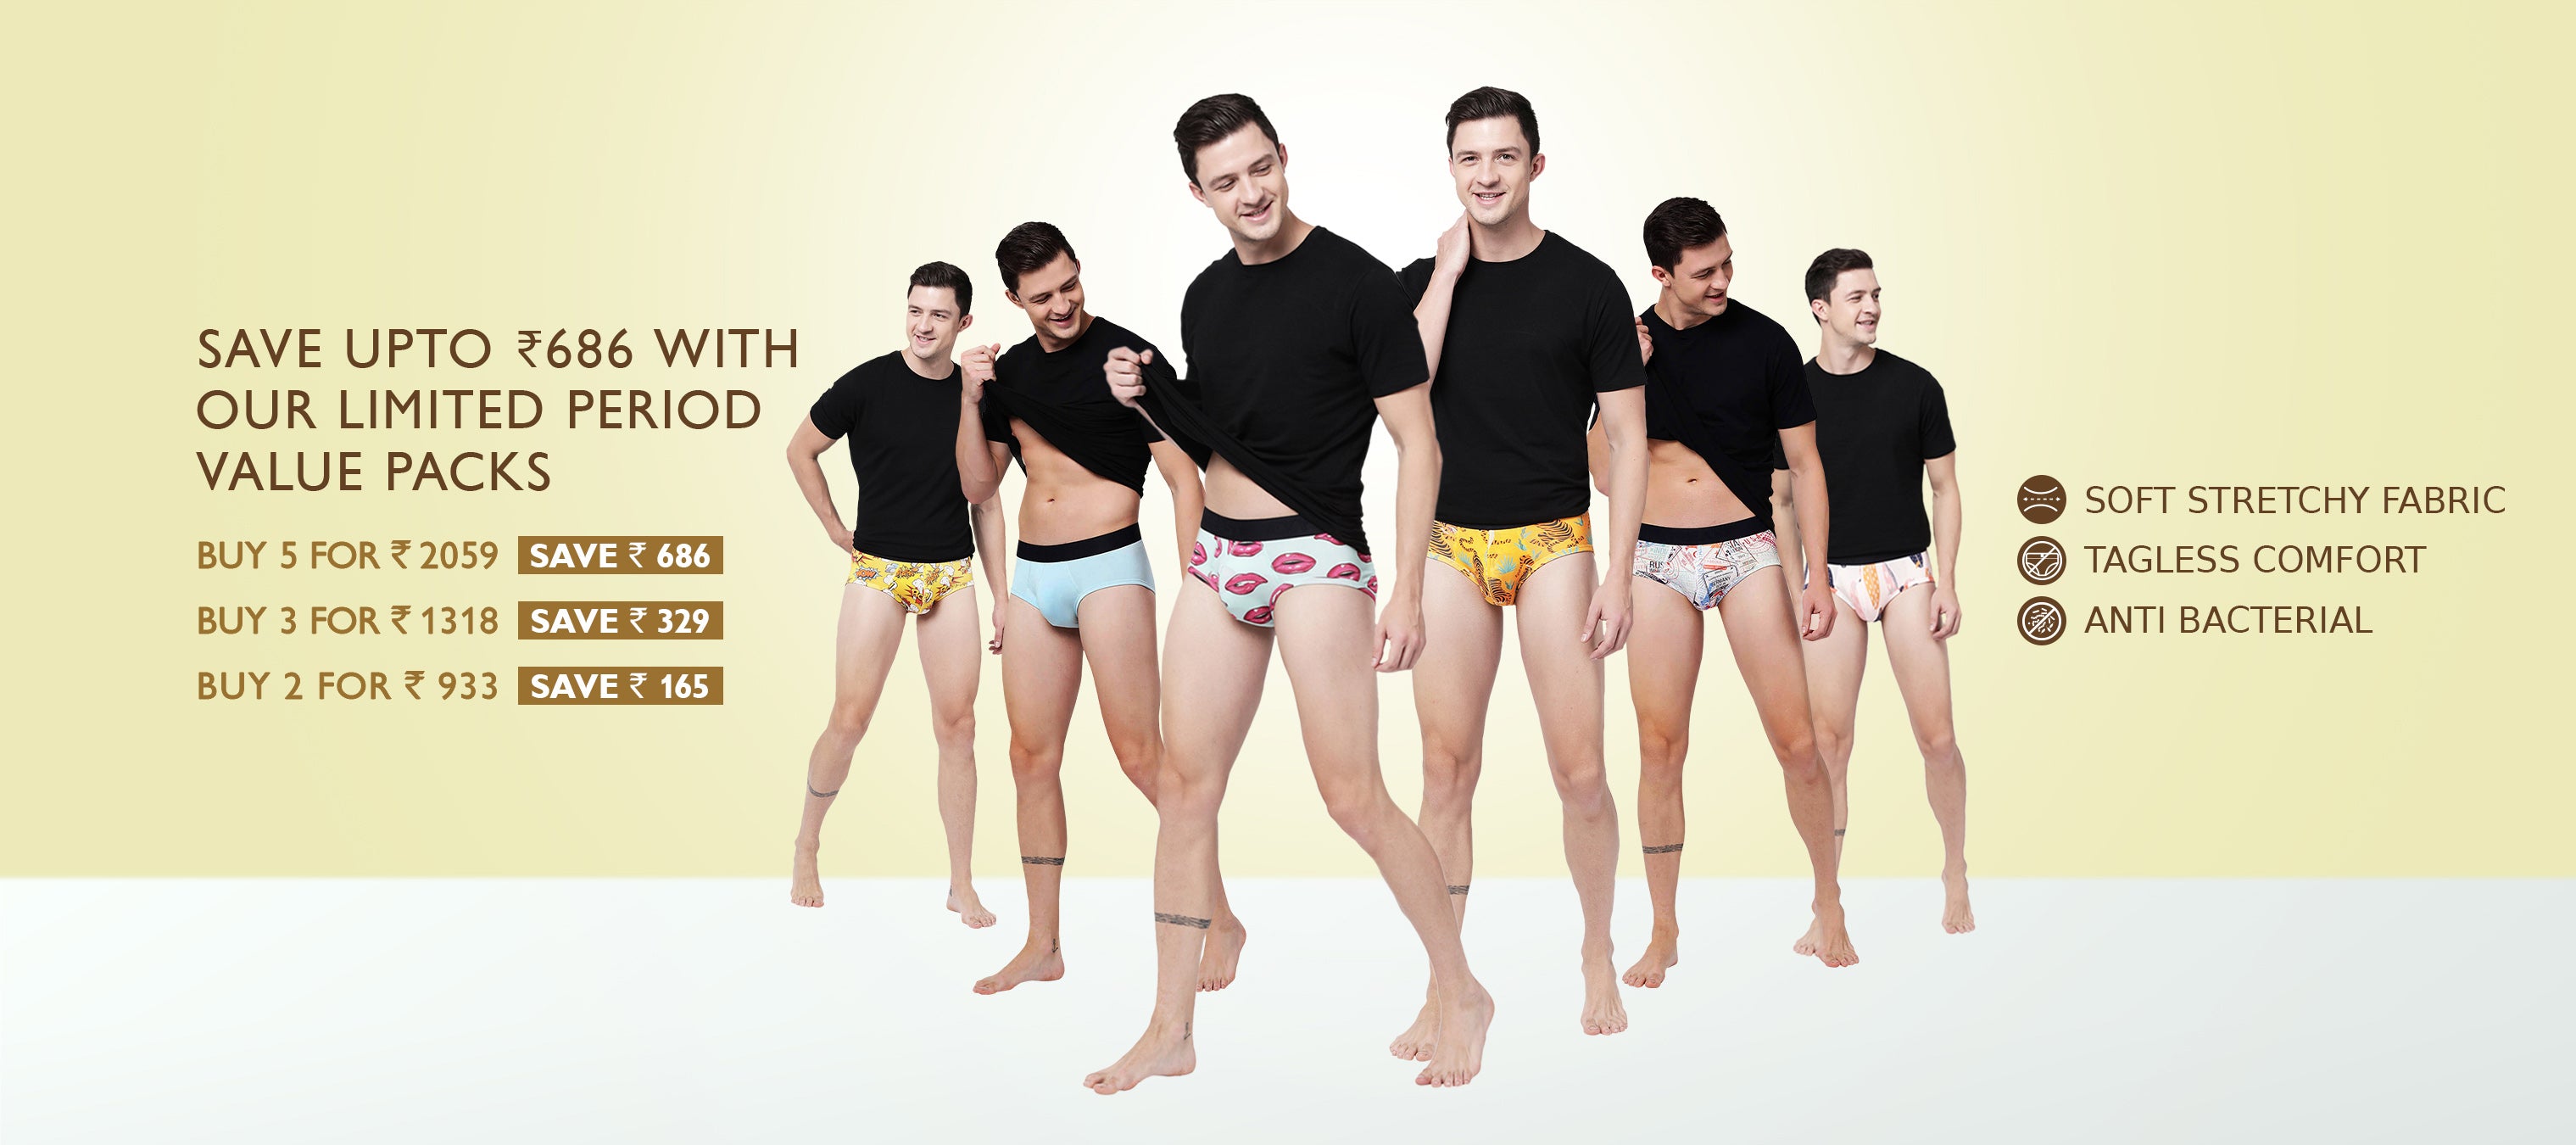 Saving The Jewels: The History Of Men's Underwear